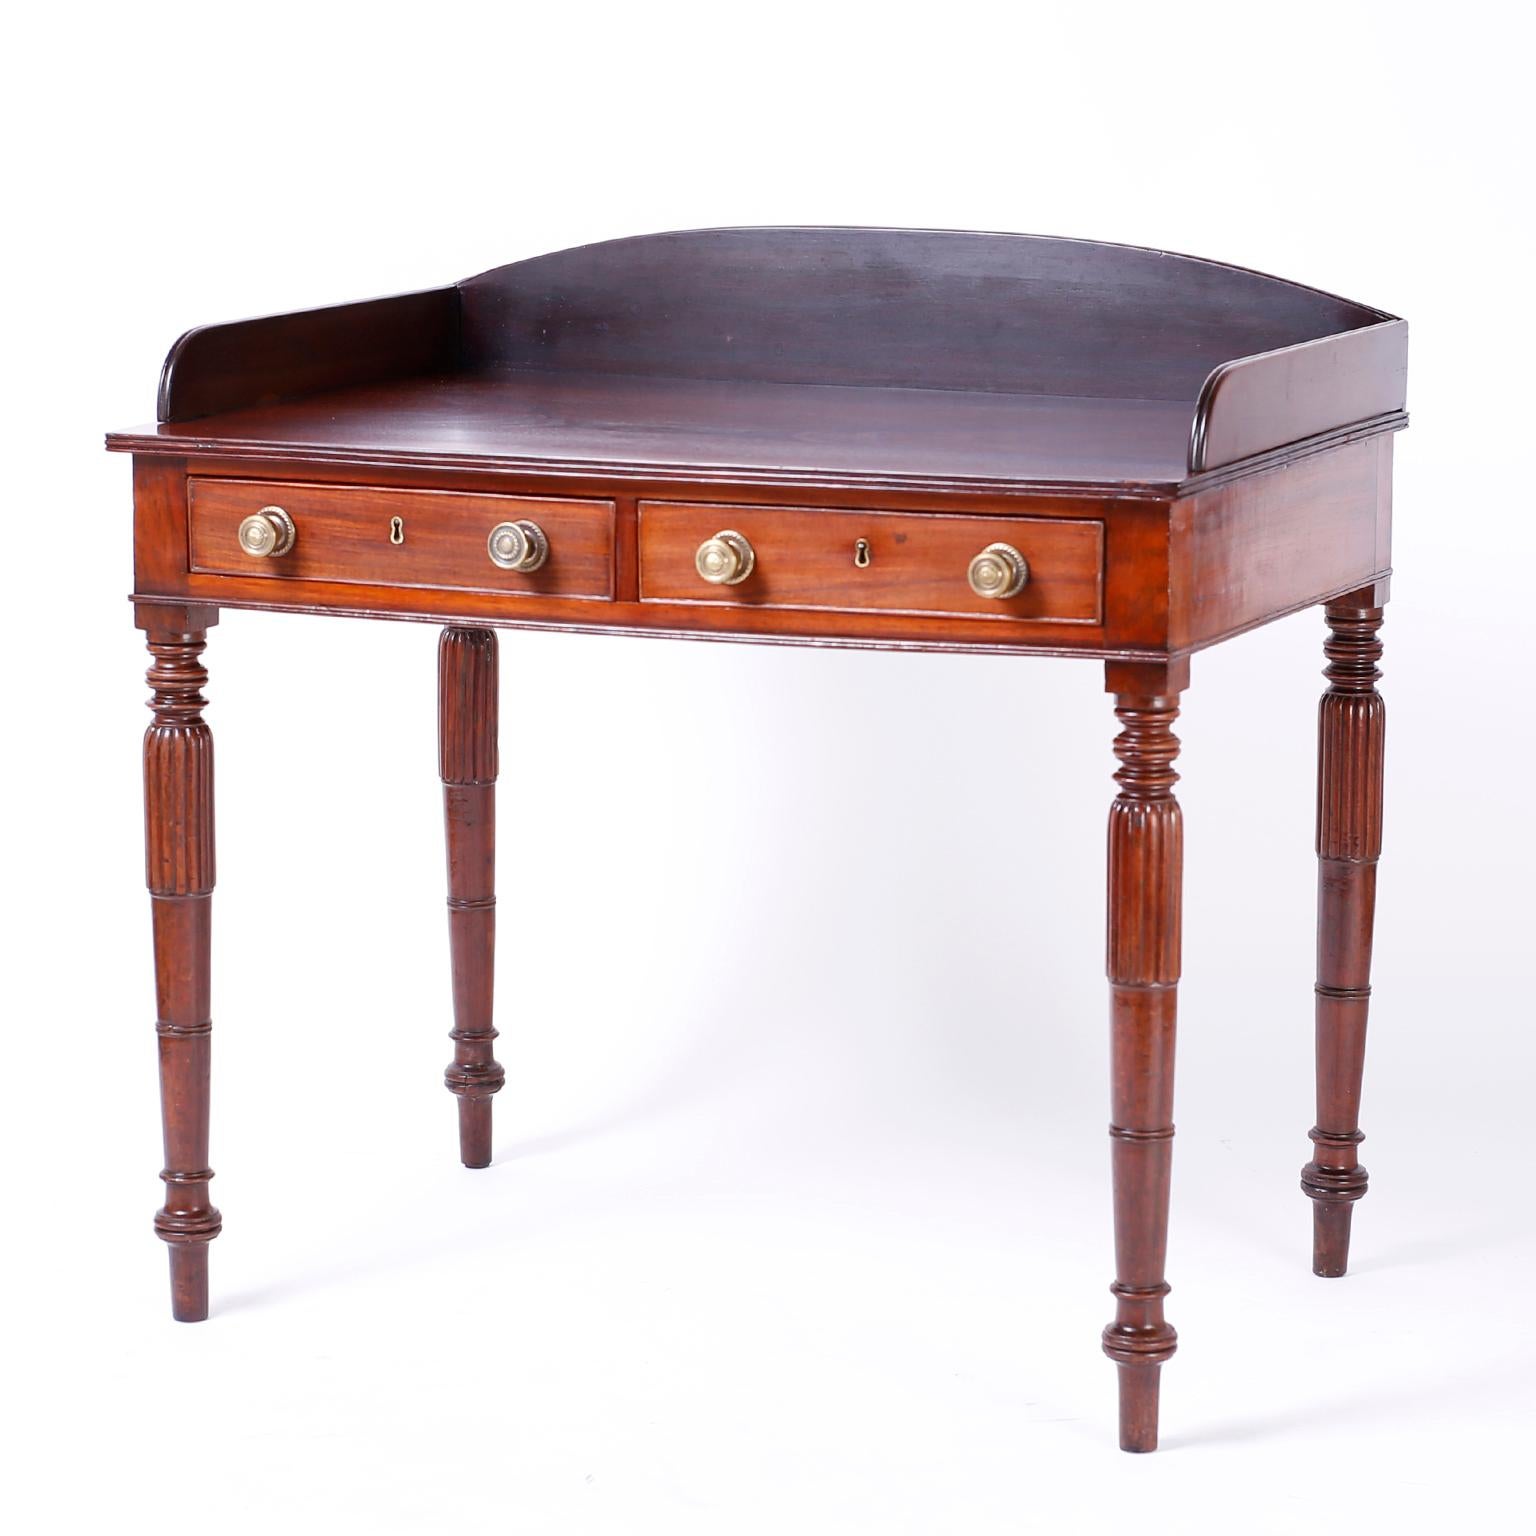 British colonial server or bar with a rosewood top and gallery with beaded edges over a mahogany base with two drawers having cast brass hardware set on elegant turned and carved legs.